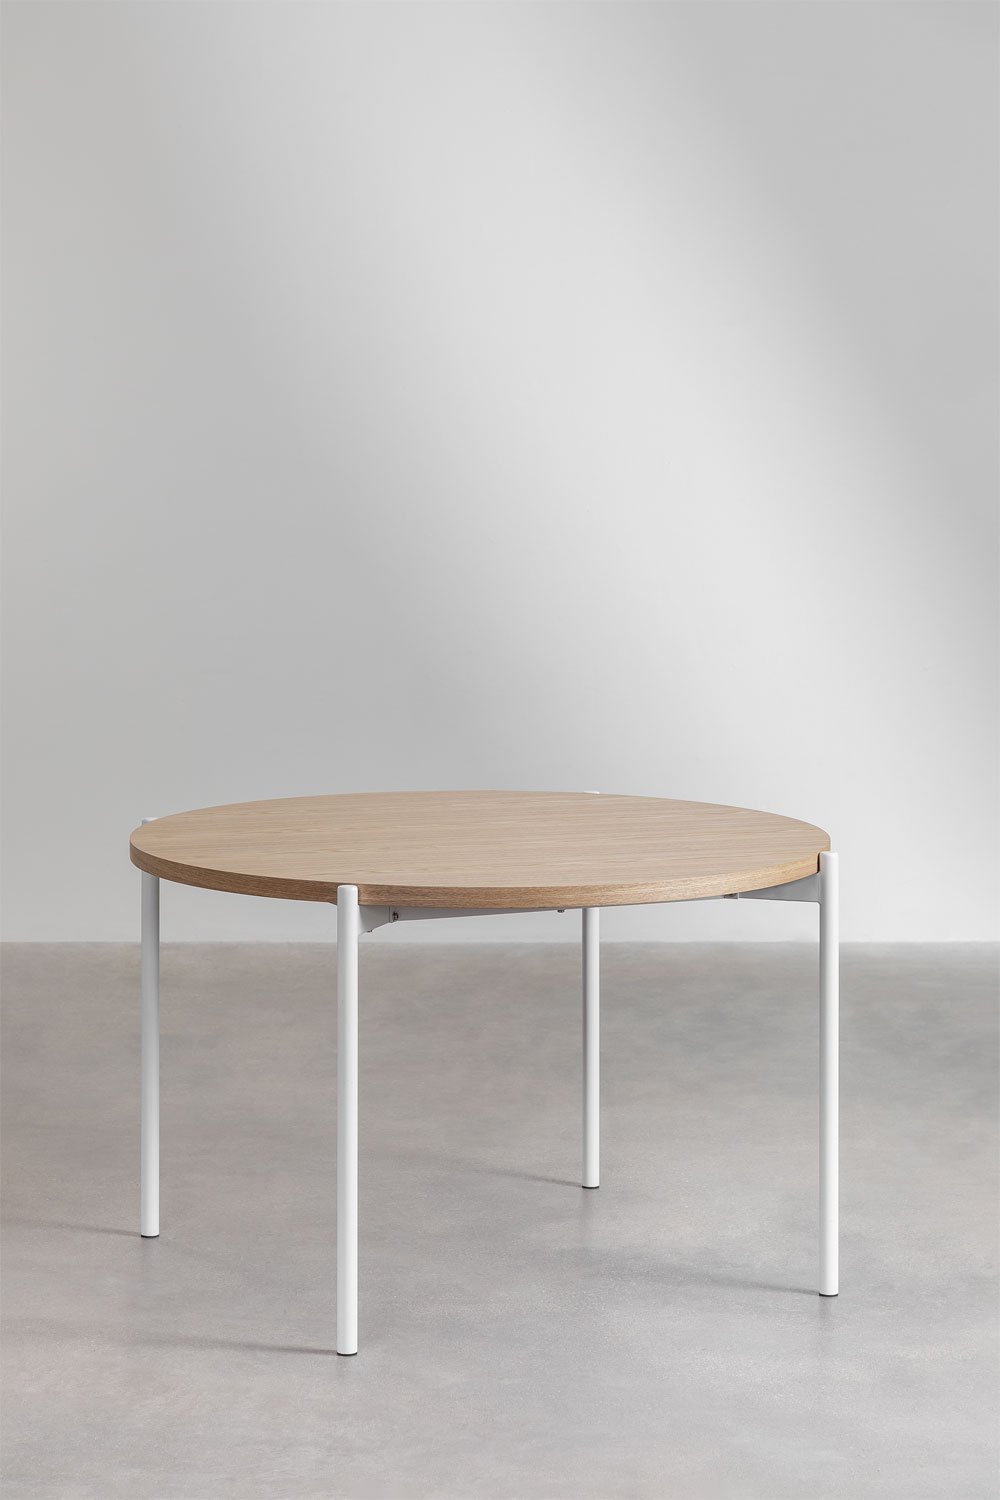 Galite Round Dining Table in Wood and Metal (Ø120 cm), gallery image 2